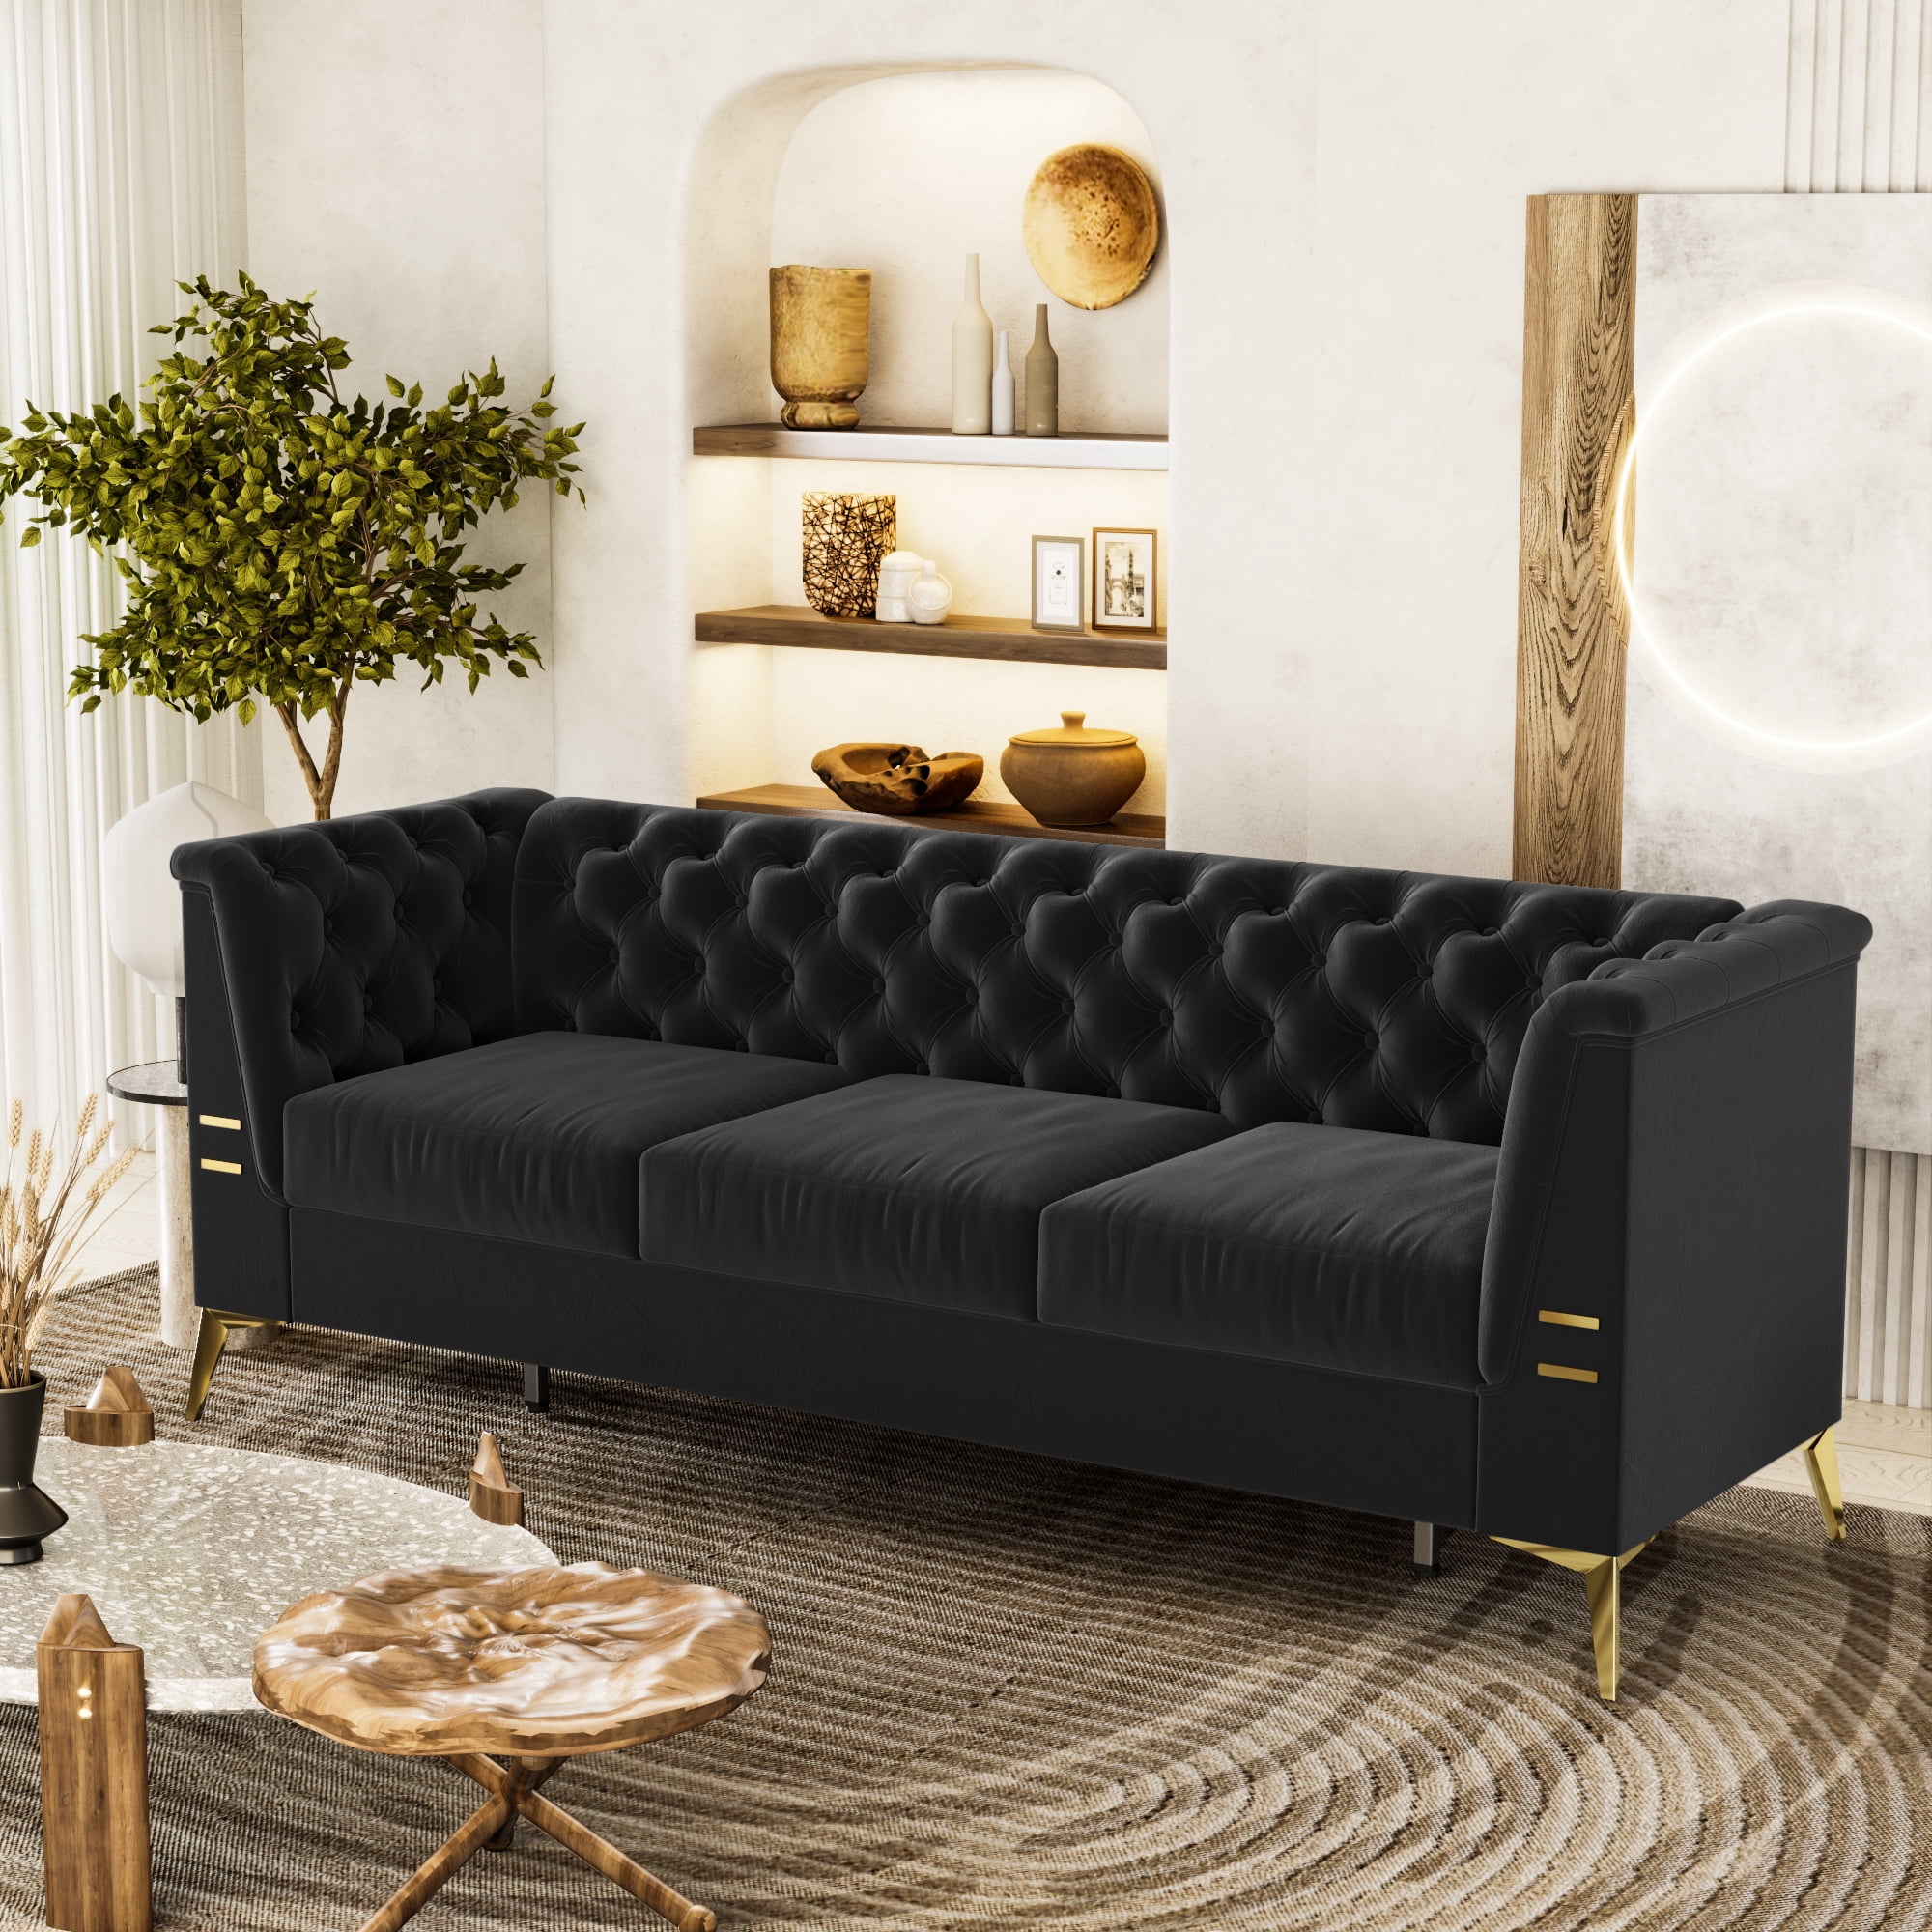 Black Velvet Sofa, 82" 3-Seat Sofa and Couch, Velvet Upholstered for Living Room, Modern Futon Tufted Sofa with Gold Metal Legs, Accent Arm Sofa Furniture for Home Apartment -